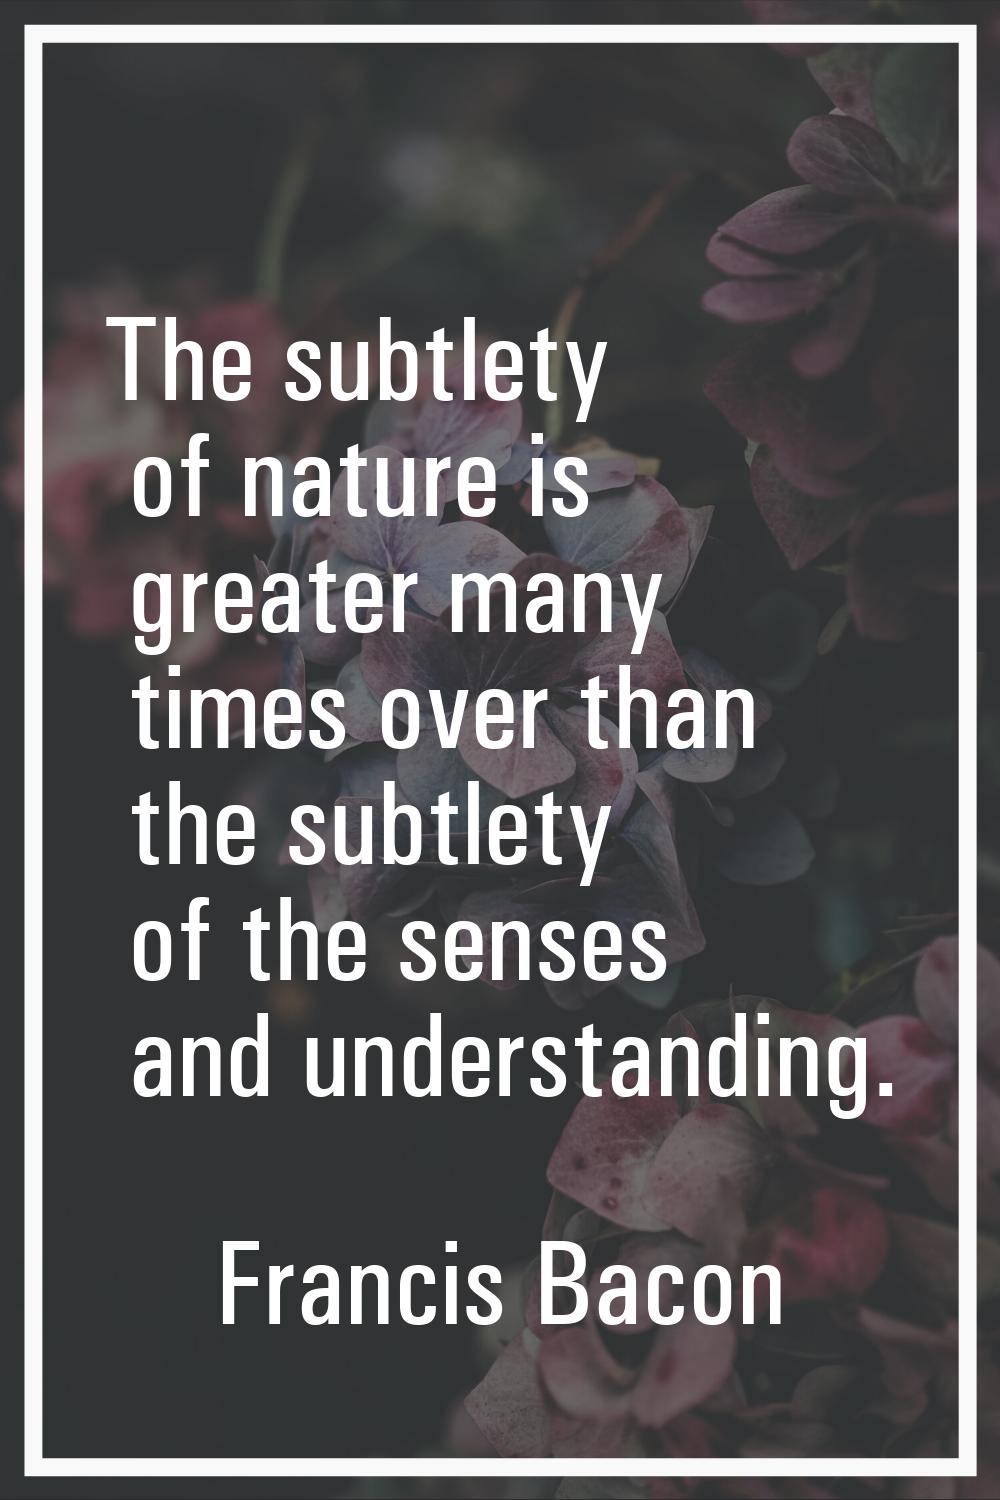 The subtlety of nature is greater many times over than the subtlety of the senses and understanding